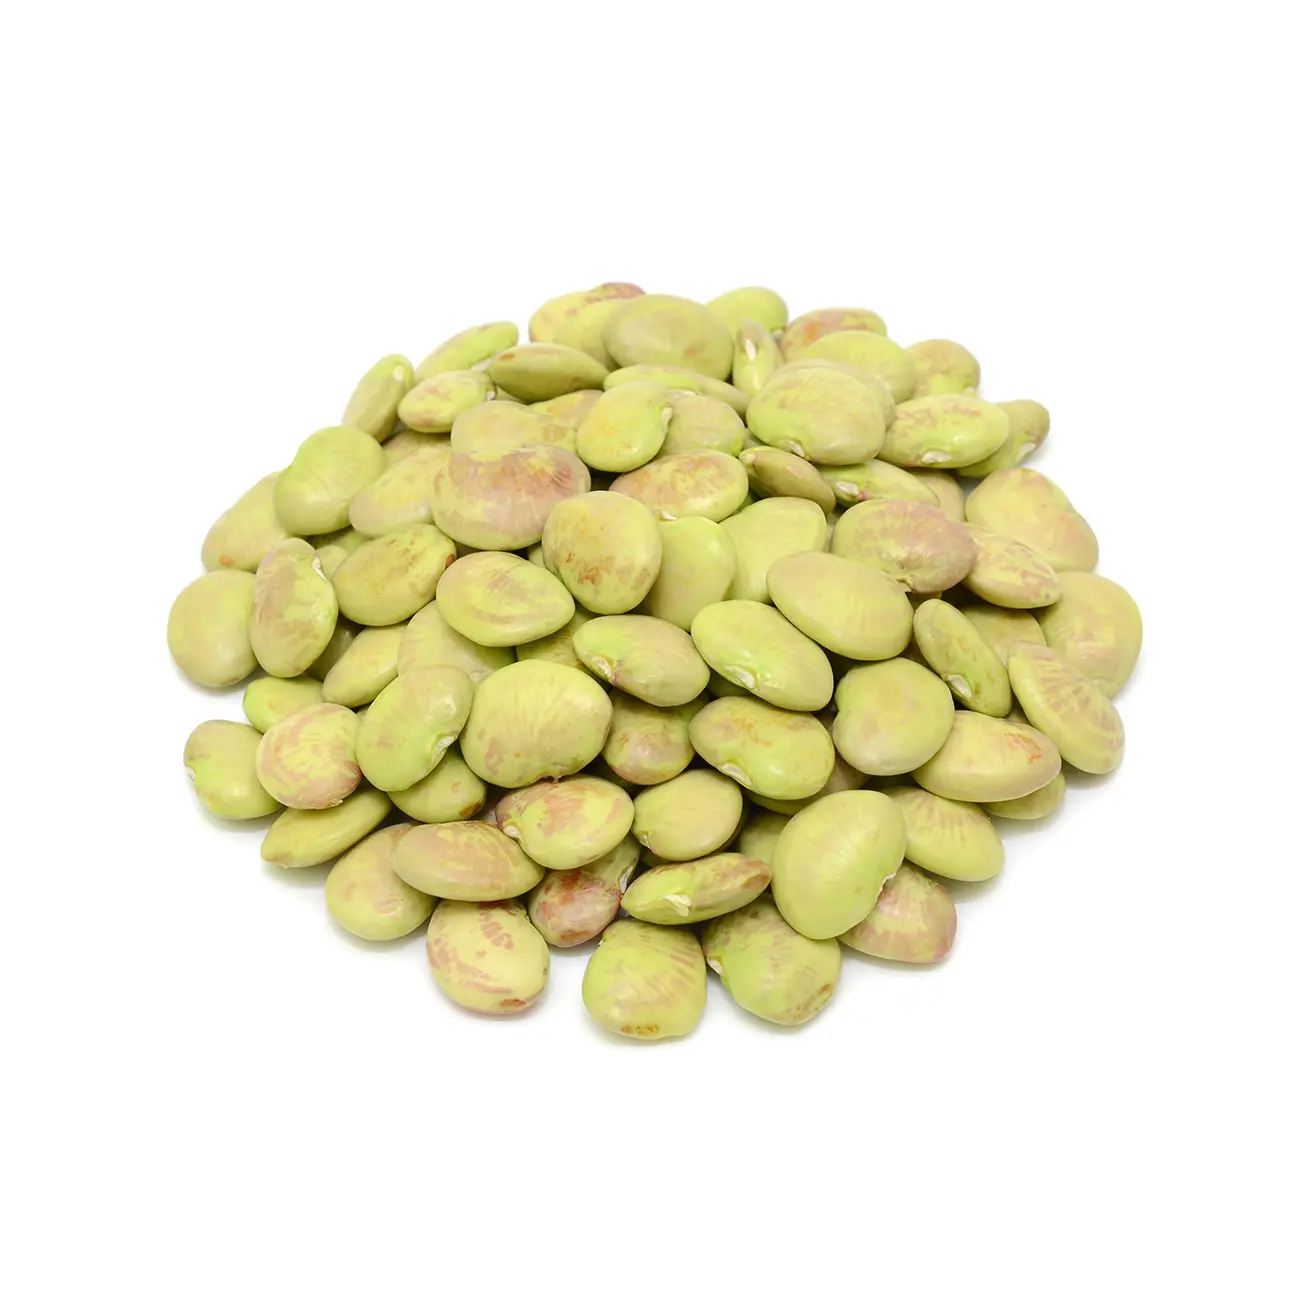 smoked butter beans - What is the difference between green beans and butter beans